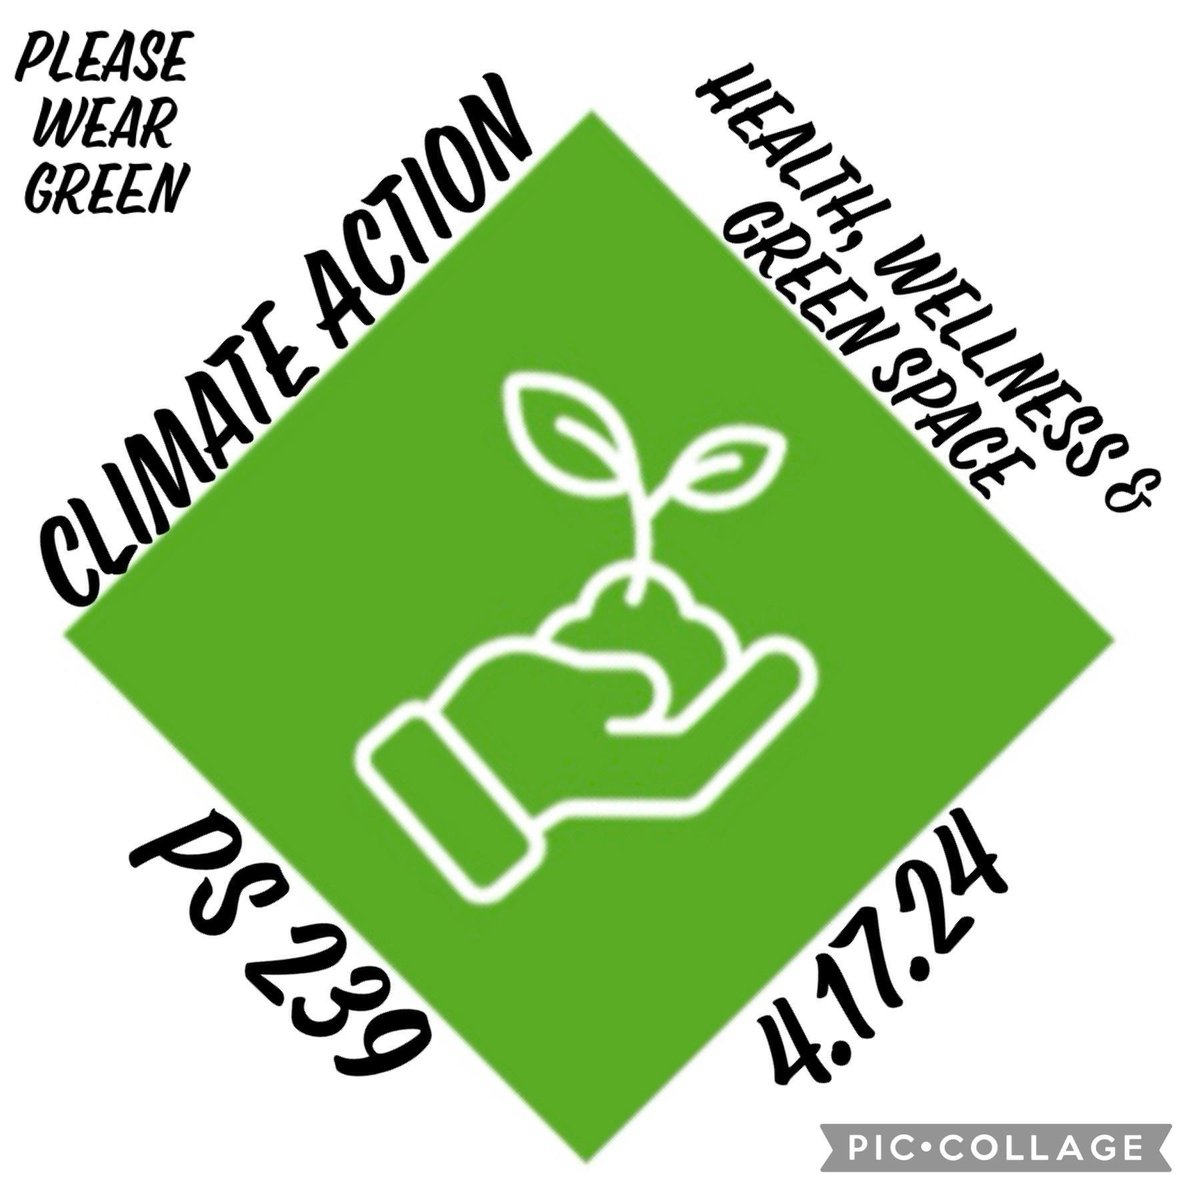 Today is NYC’s third Climate Action Day: Health, Wellness & Green Space. To support this day of action, we wore green 🌱💚 #ClimateAction #PS239q #Health #Wellness #Greenspace #District24 @NYC_District24 @NYCSchools #SaveTheEarth #ClimateActionDay